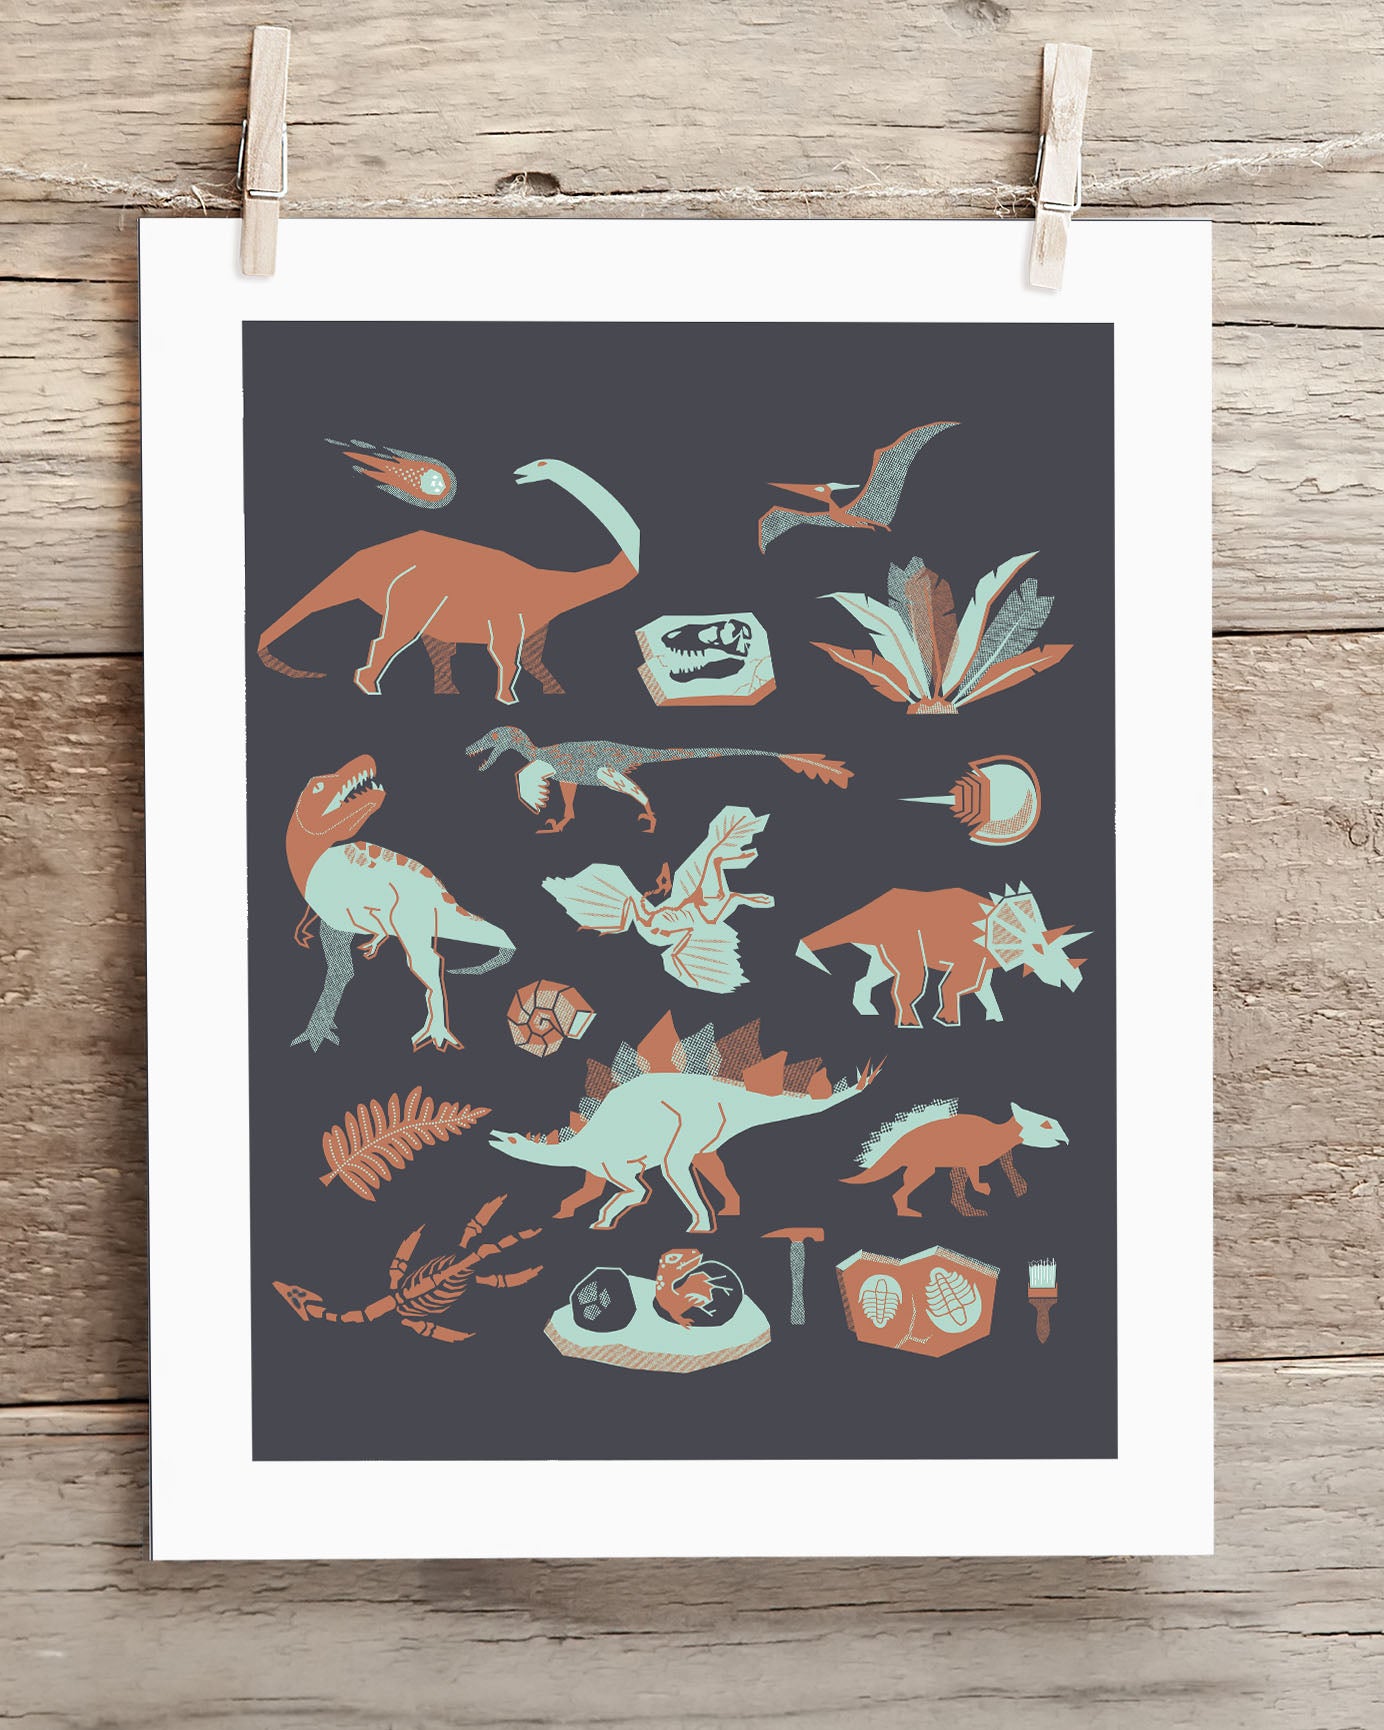 An Retro Dinosaurs Museum Print of dinosaurs and plants hanging on a clothesline by Cognitive Surplus.